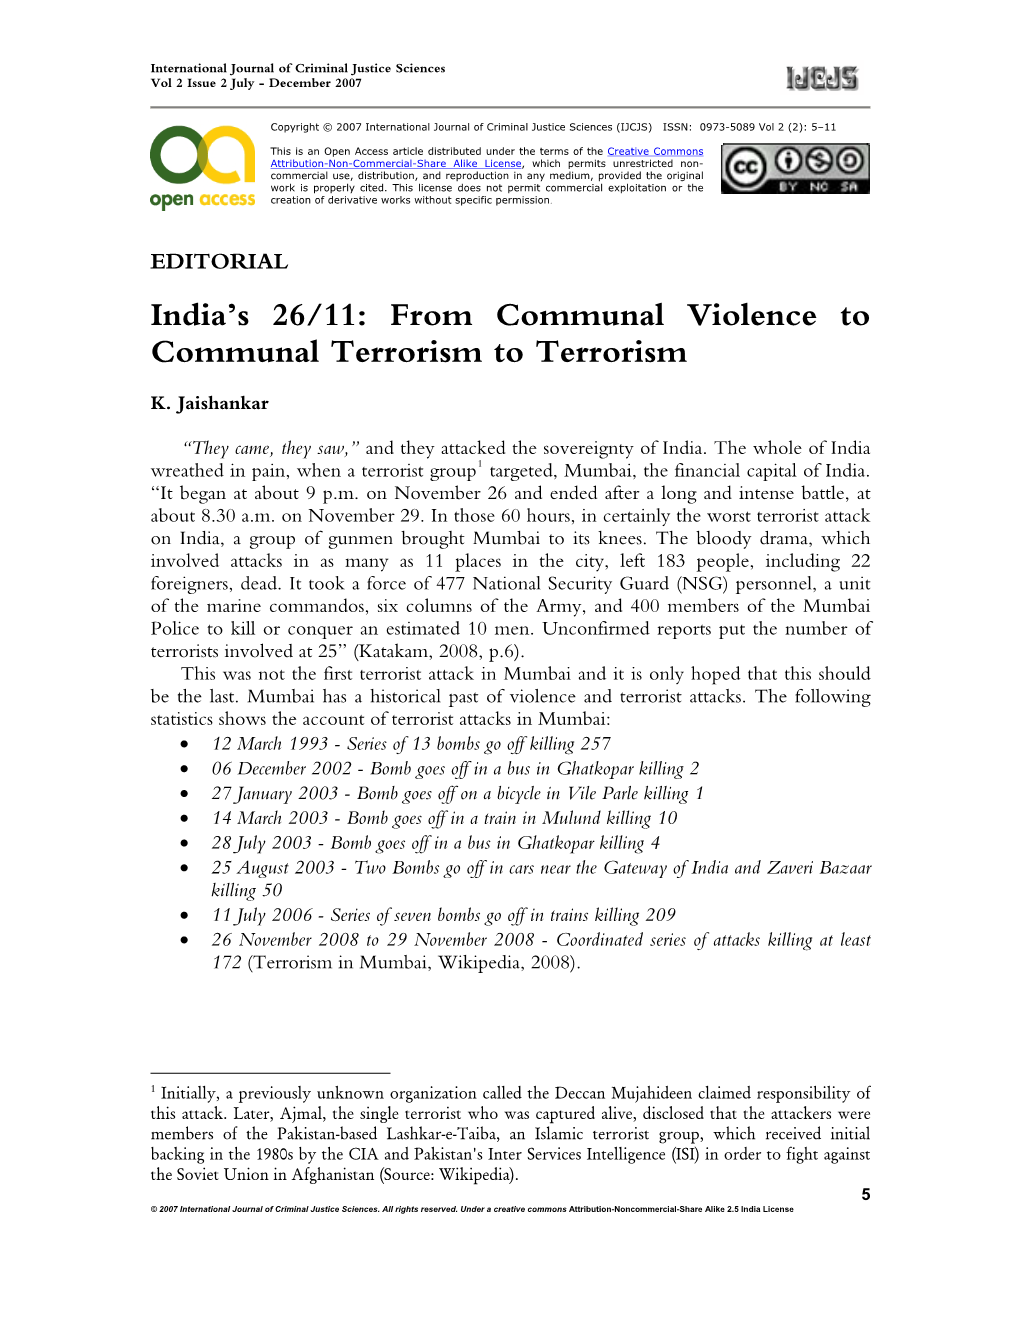 From Communal Violence to Communal Terrorism to Terrorism